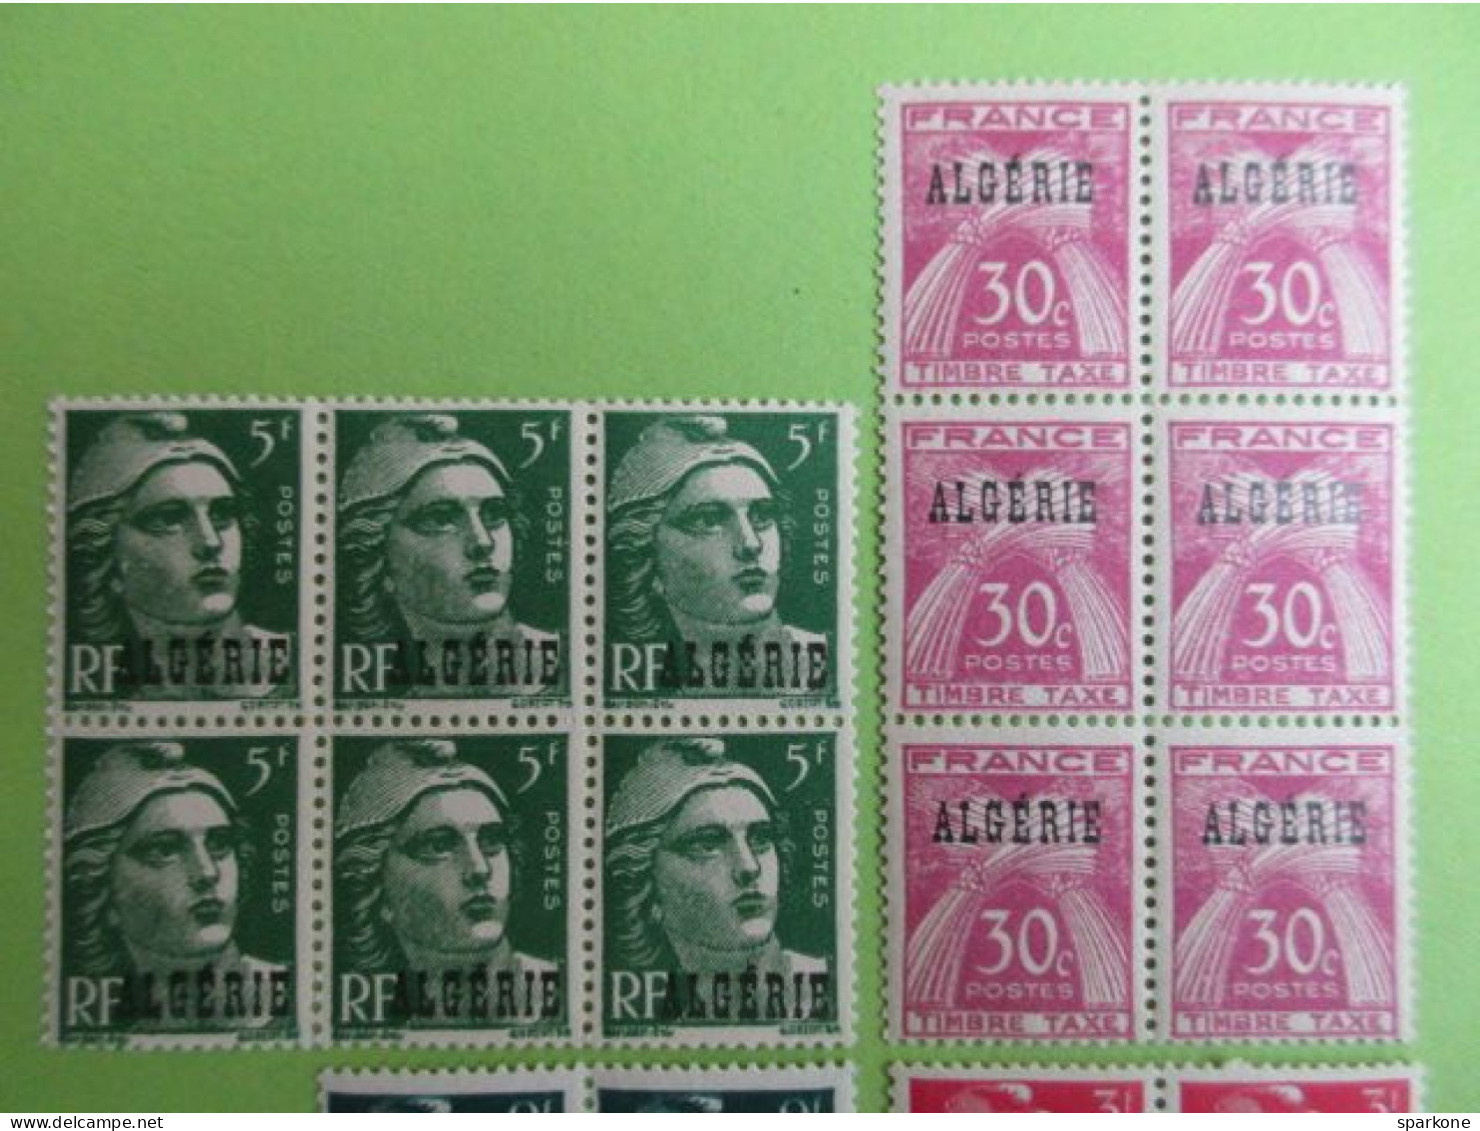 Lot Marianne Gandon - Surcharges Algerie - Timbres Taxe Surcharges Algérie - Bloc De 6 Timbres Neuf - Collections, Lots & Series